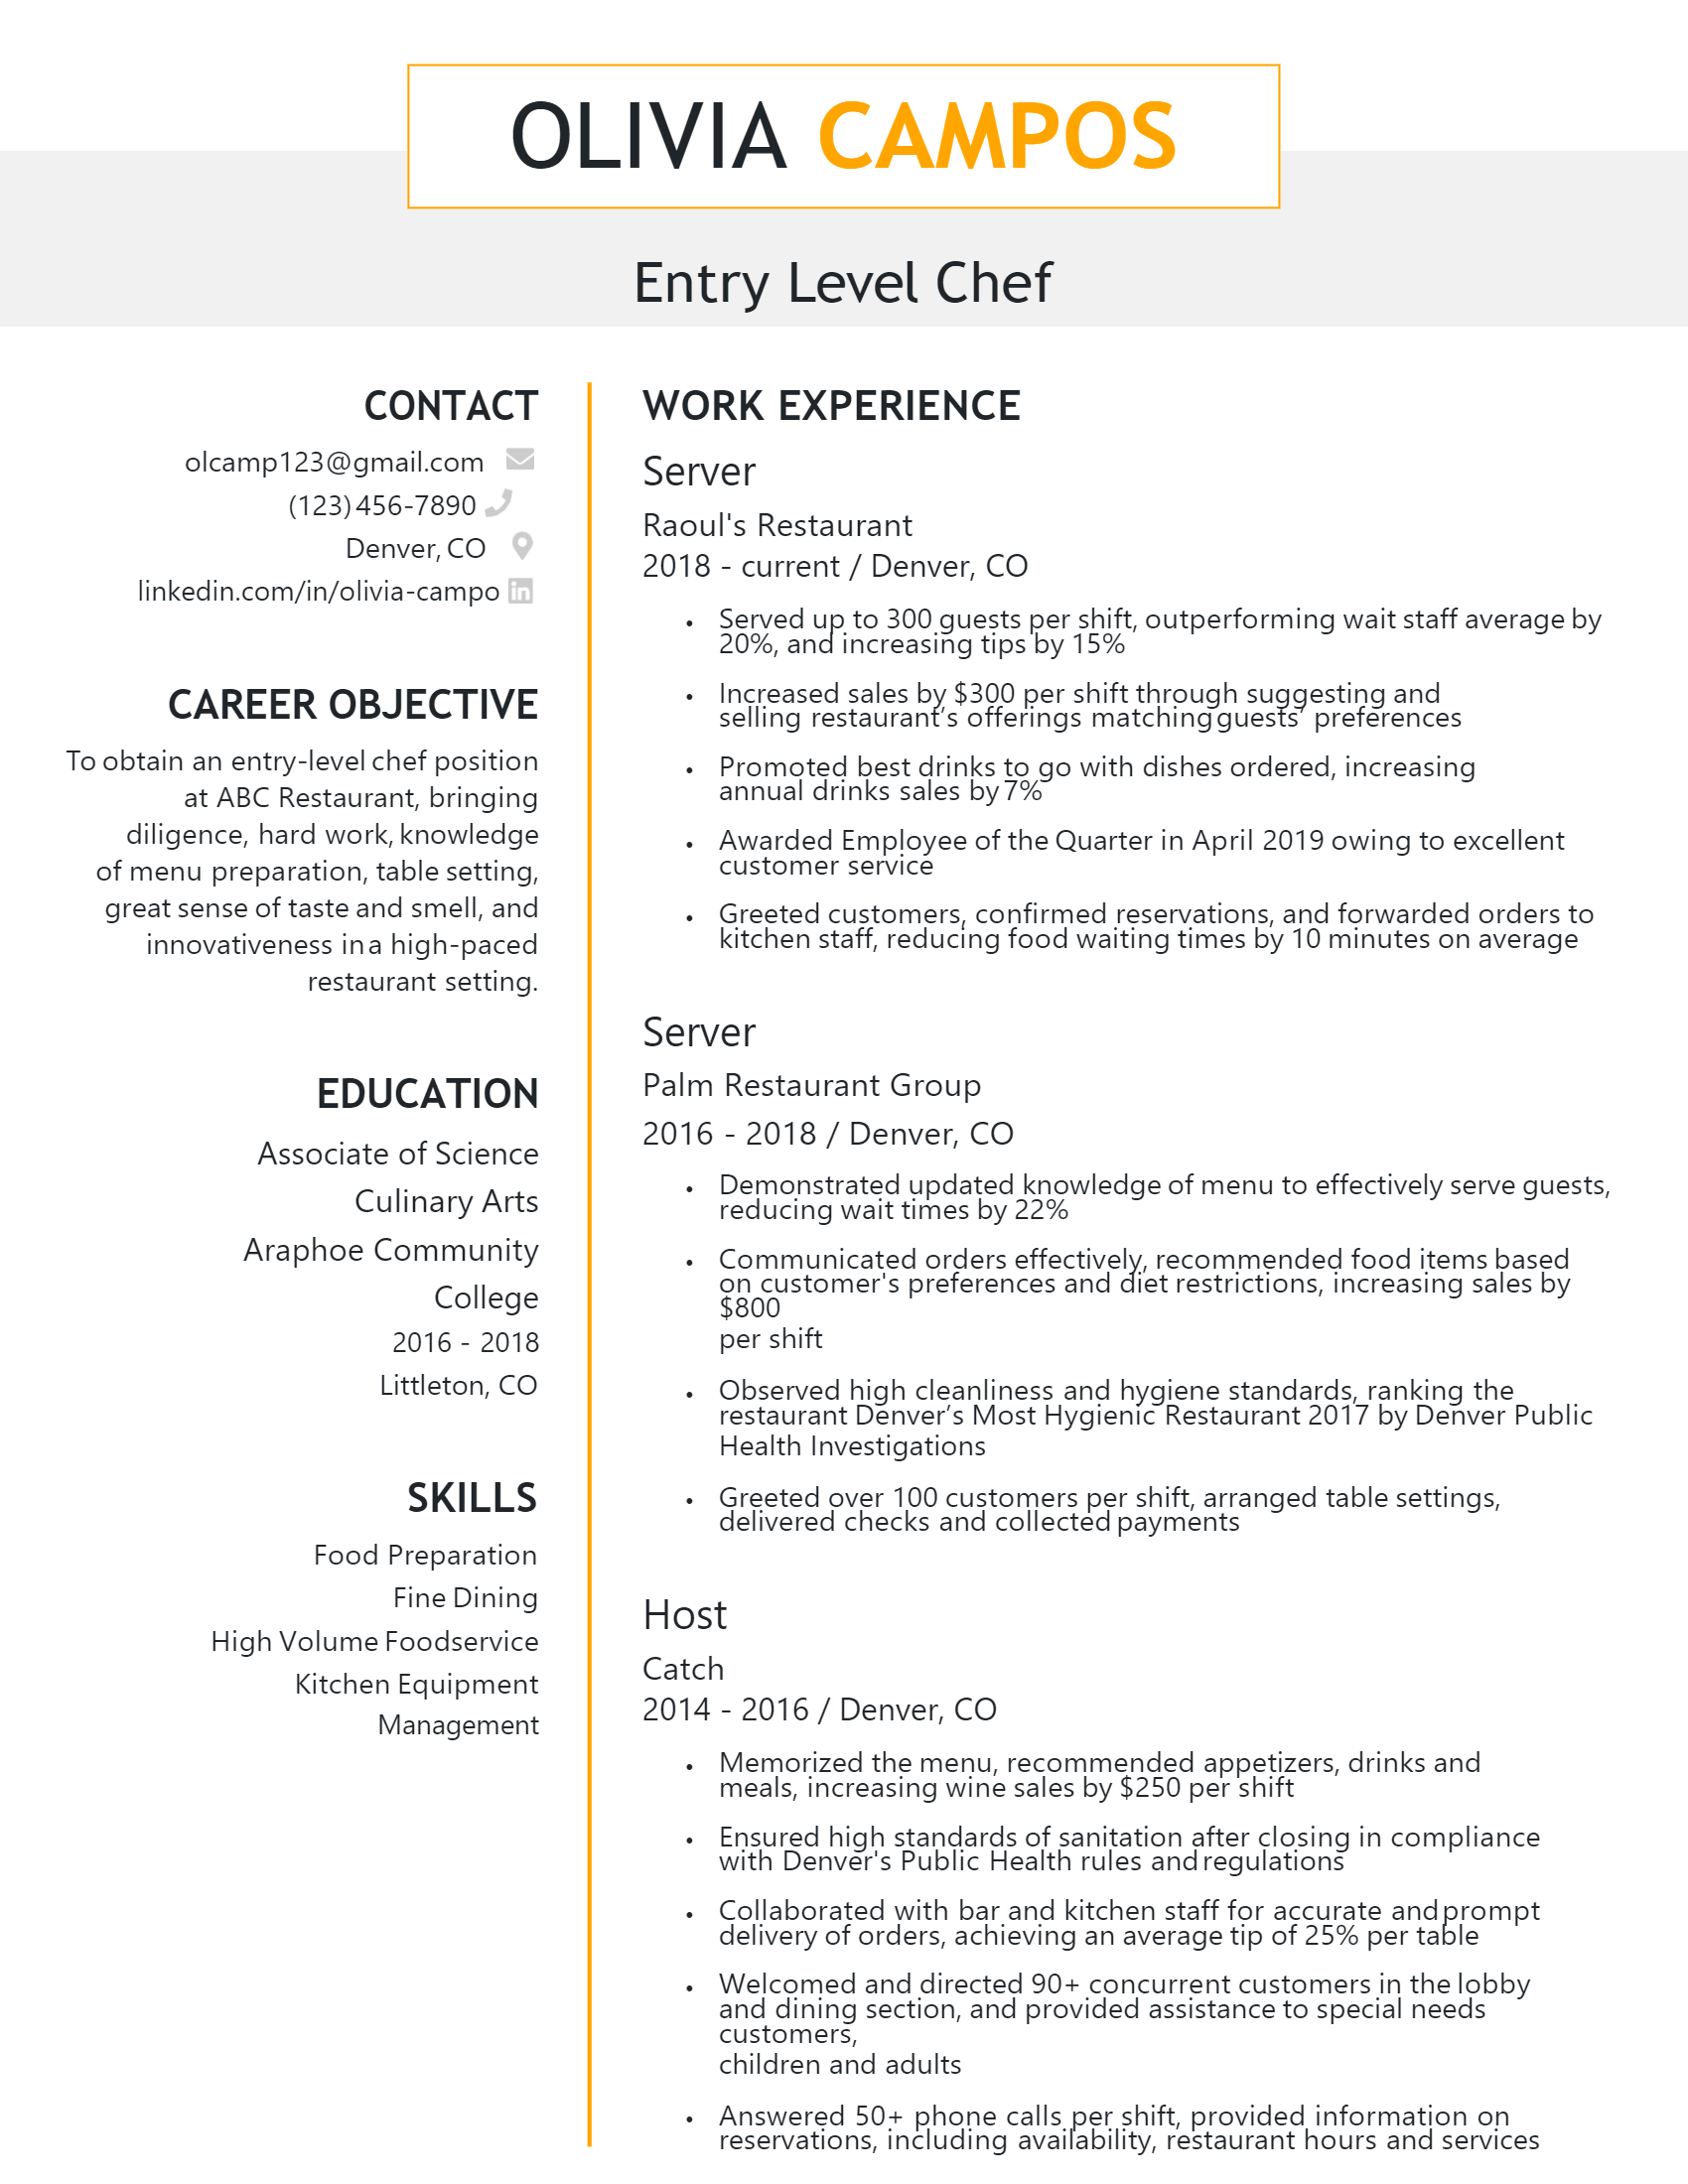 Entry Level Chef Resume .Docx (Word)